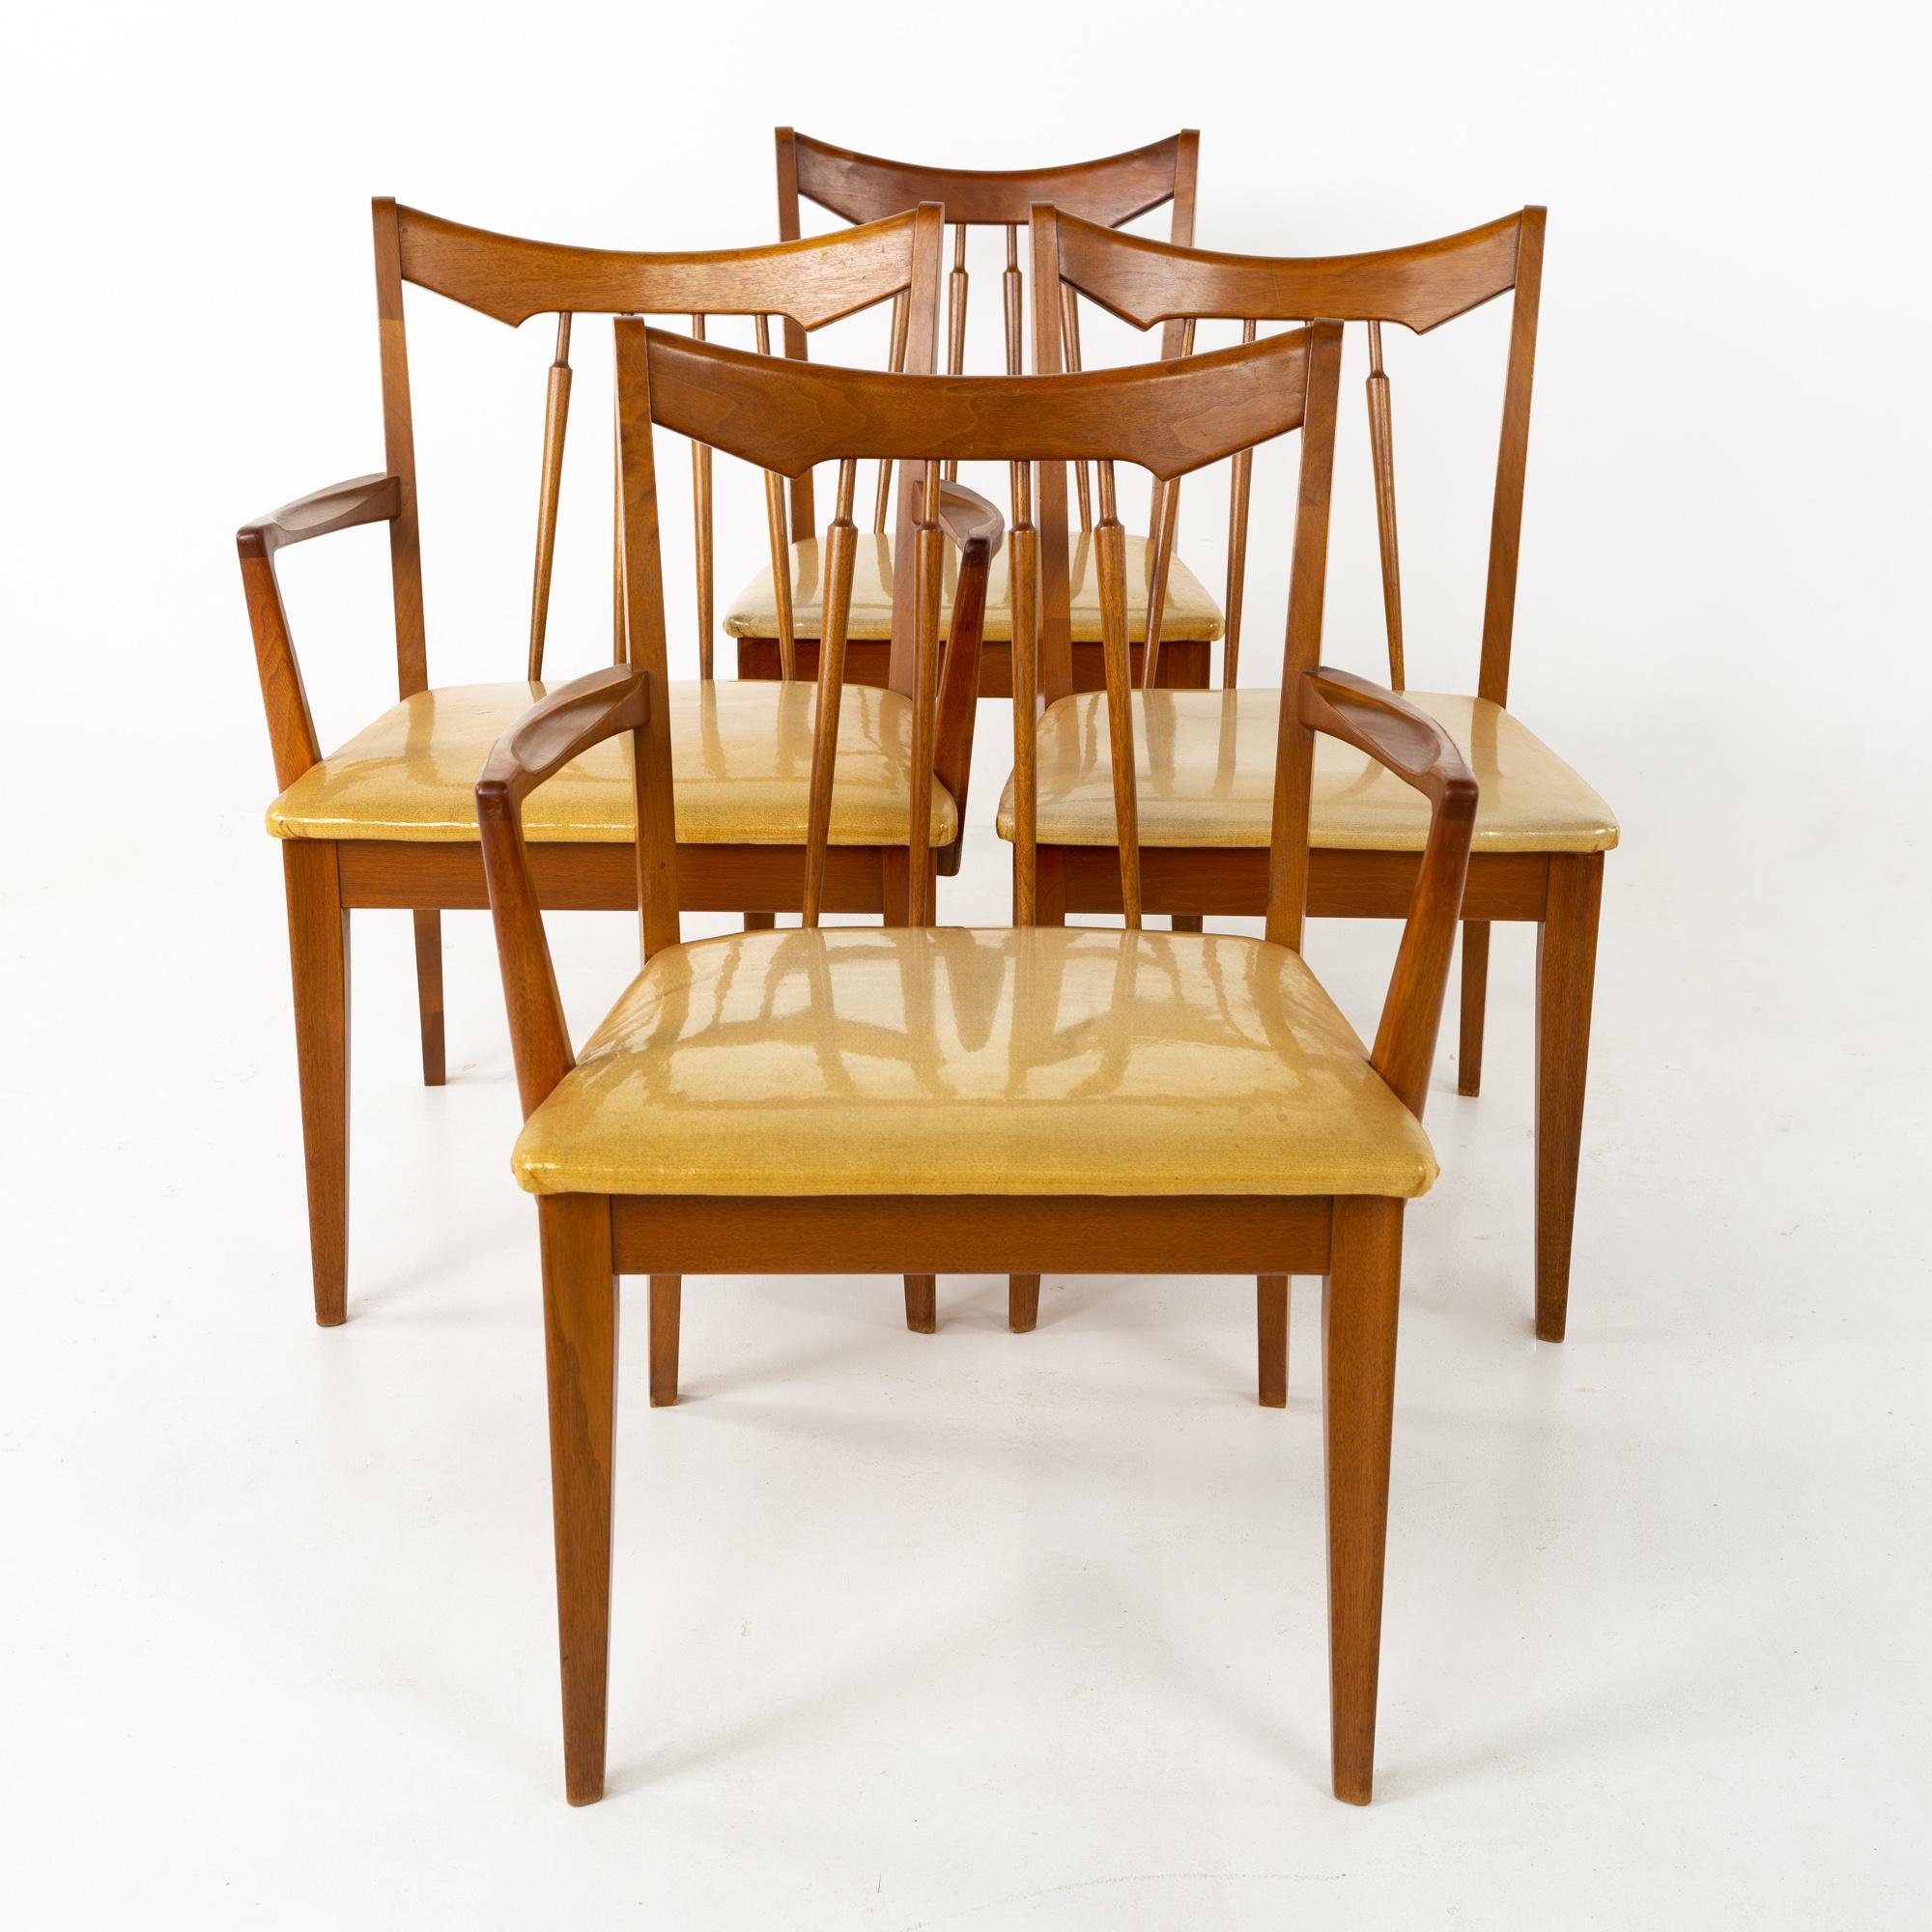 Late 20th Century Mid Century Walnut Dining Chairs - Set of 6 For Sale